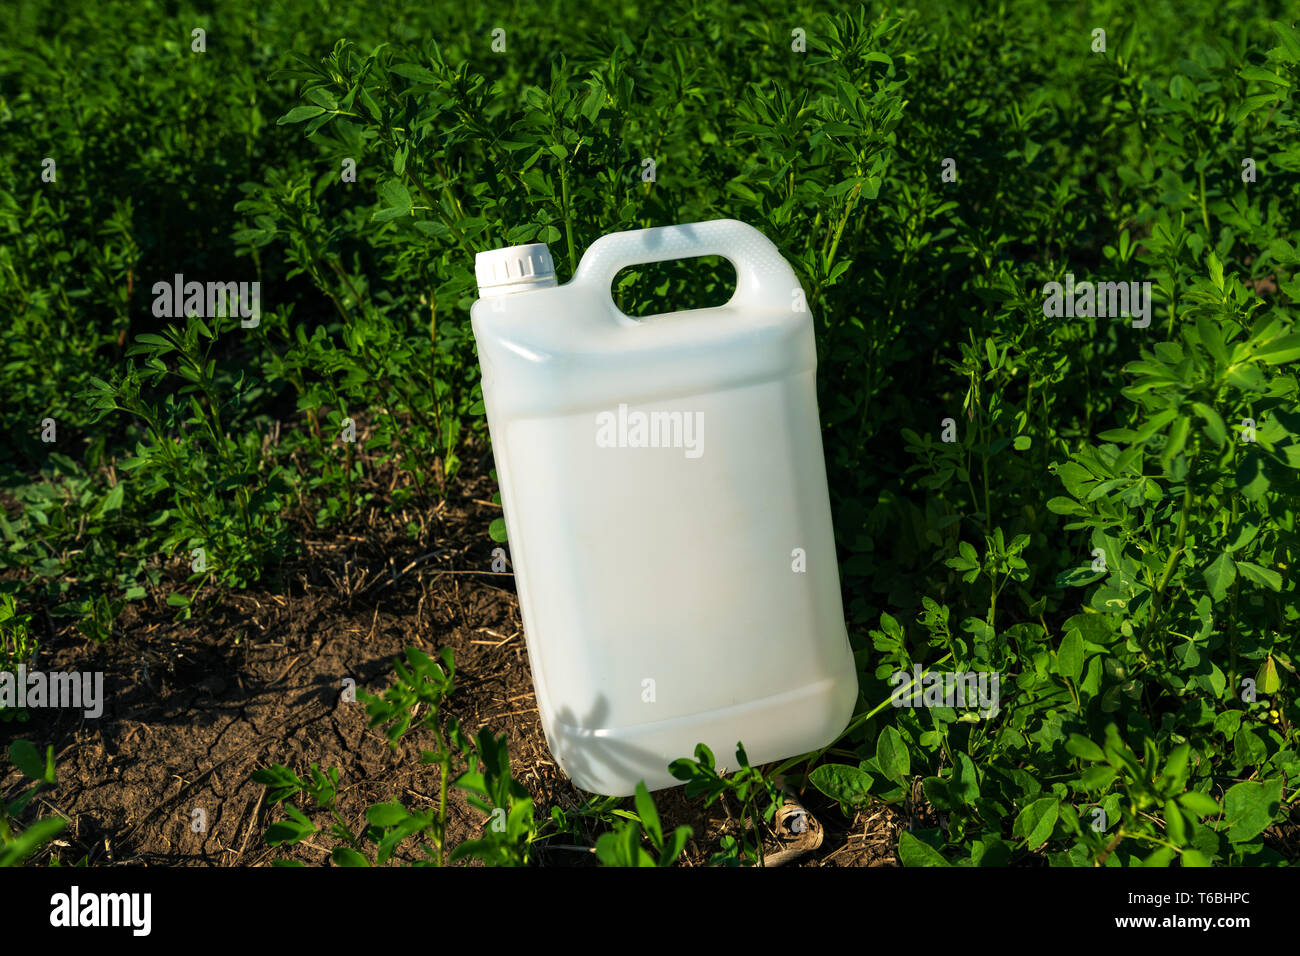 Pesticide jug mock up in clover field, crop protection concept Stock Photo